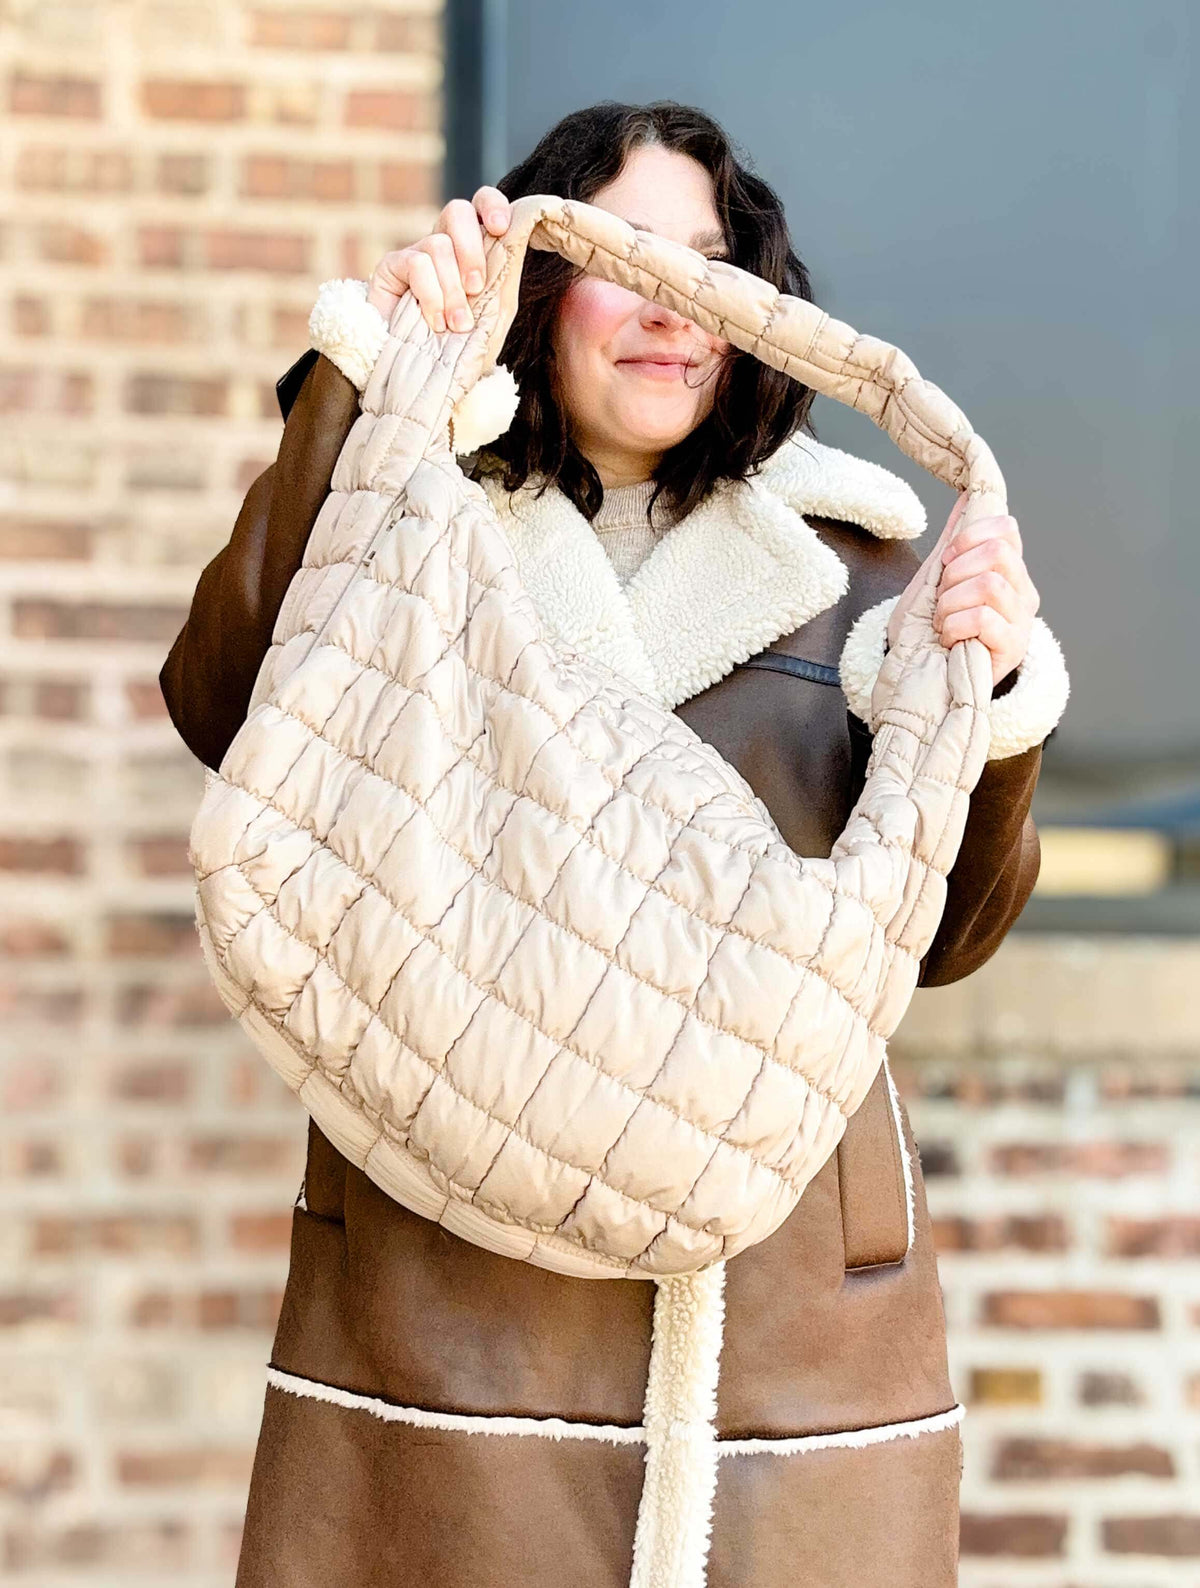 Large Quilted Bag in Beige